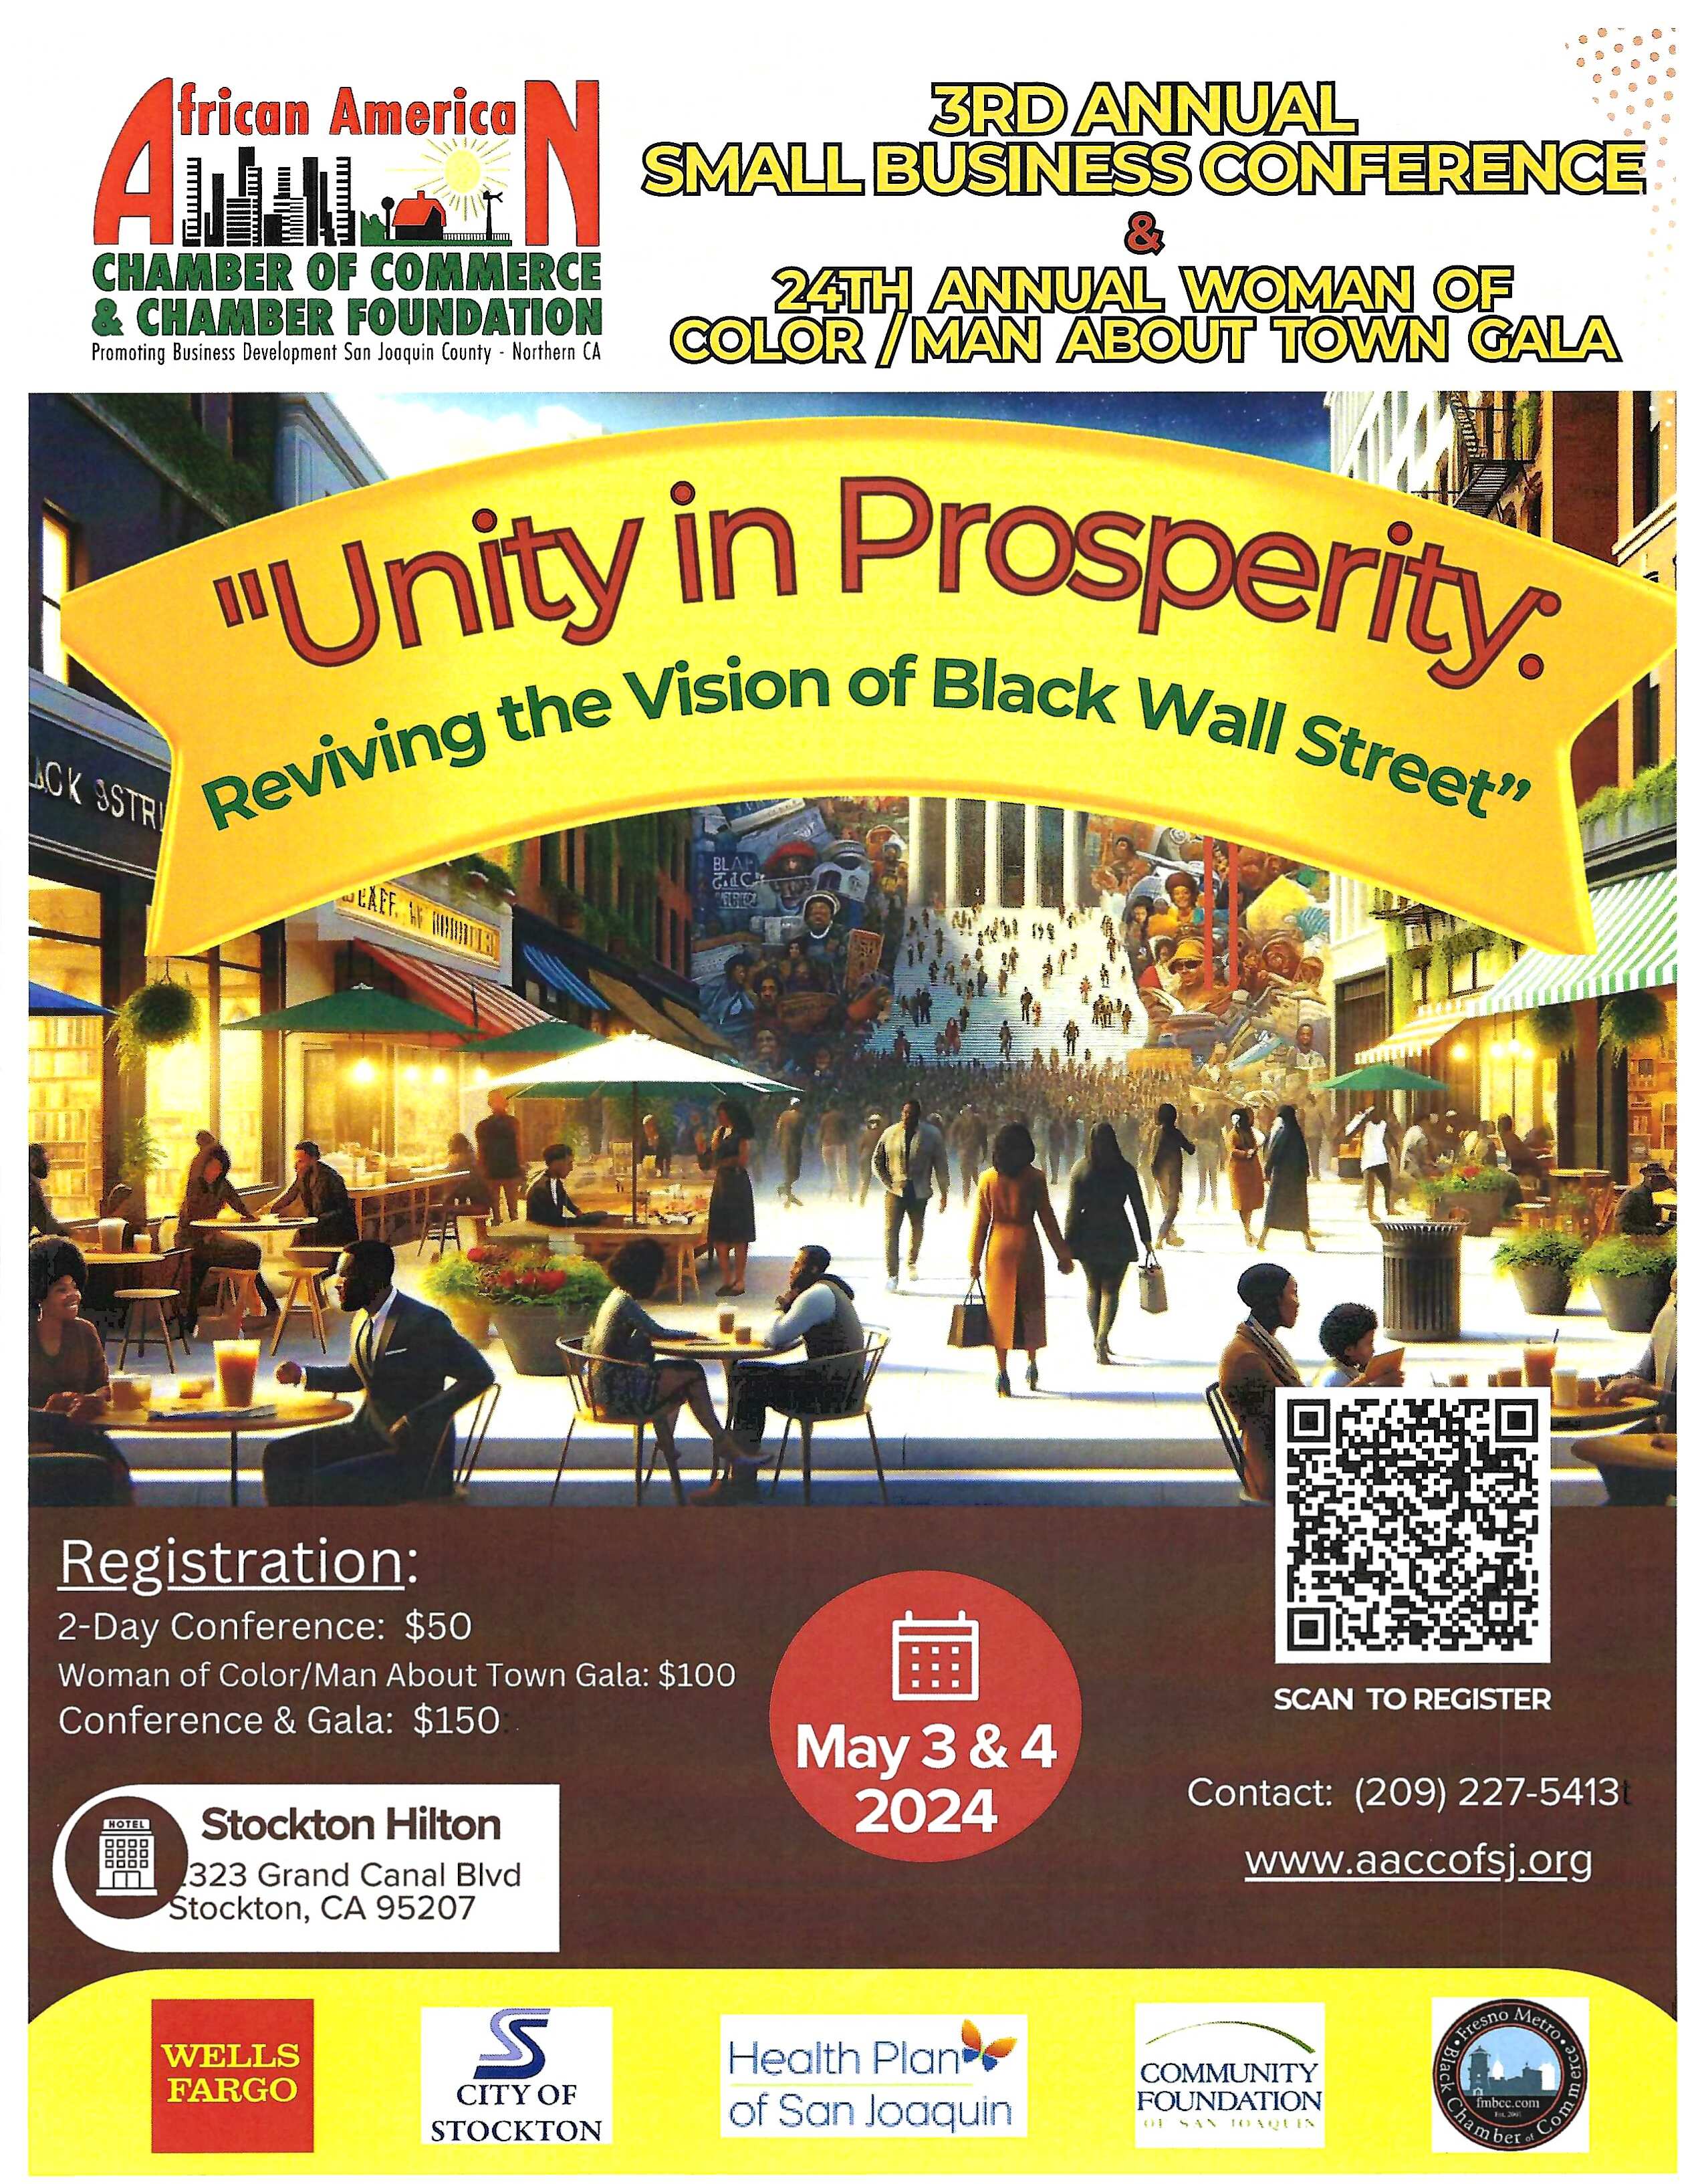 Conference flyer with sponsors